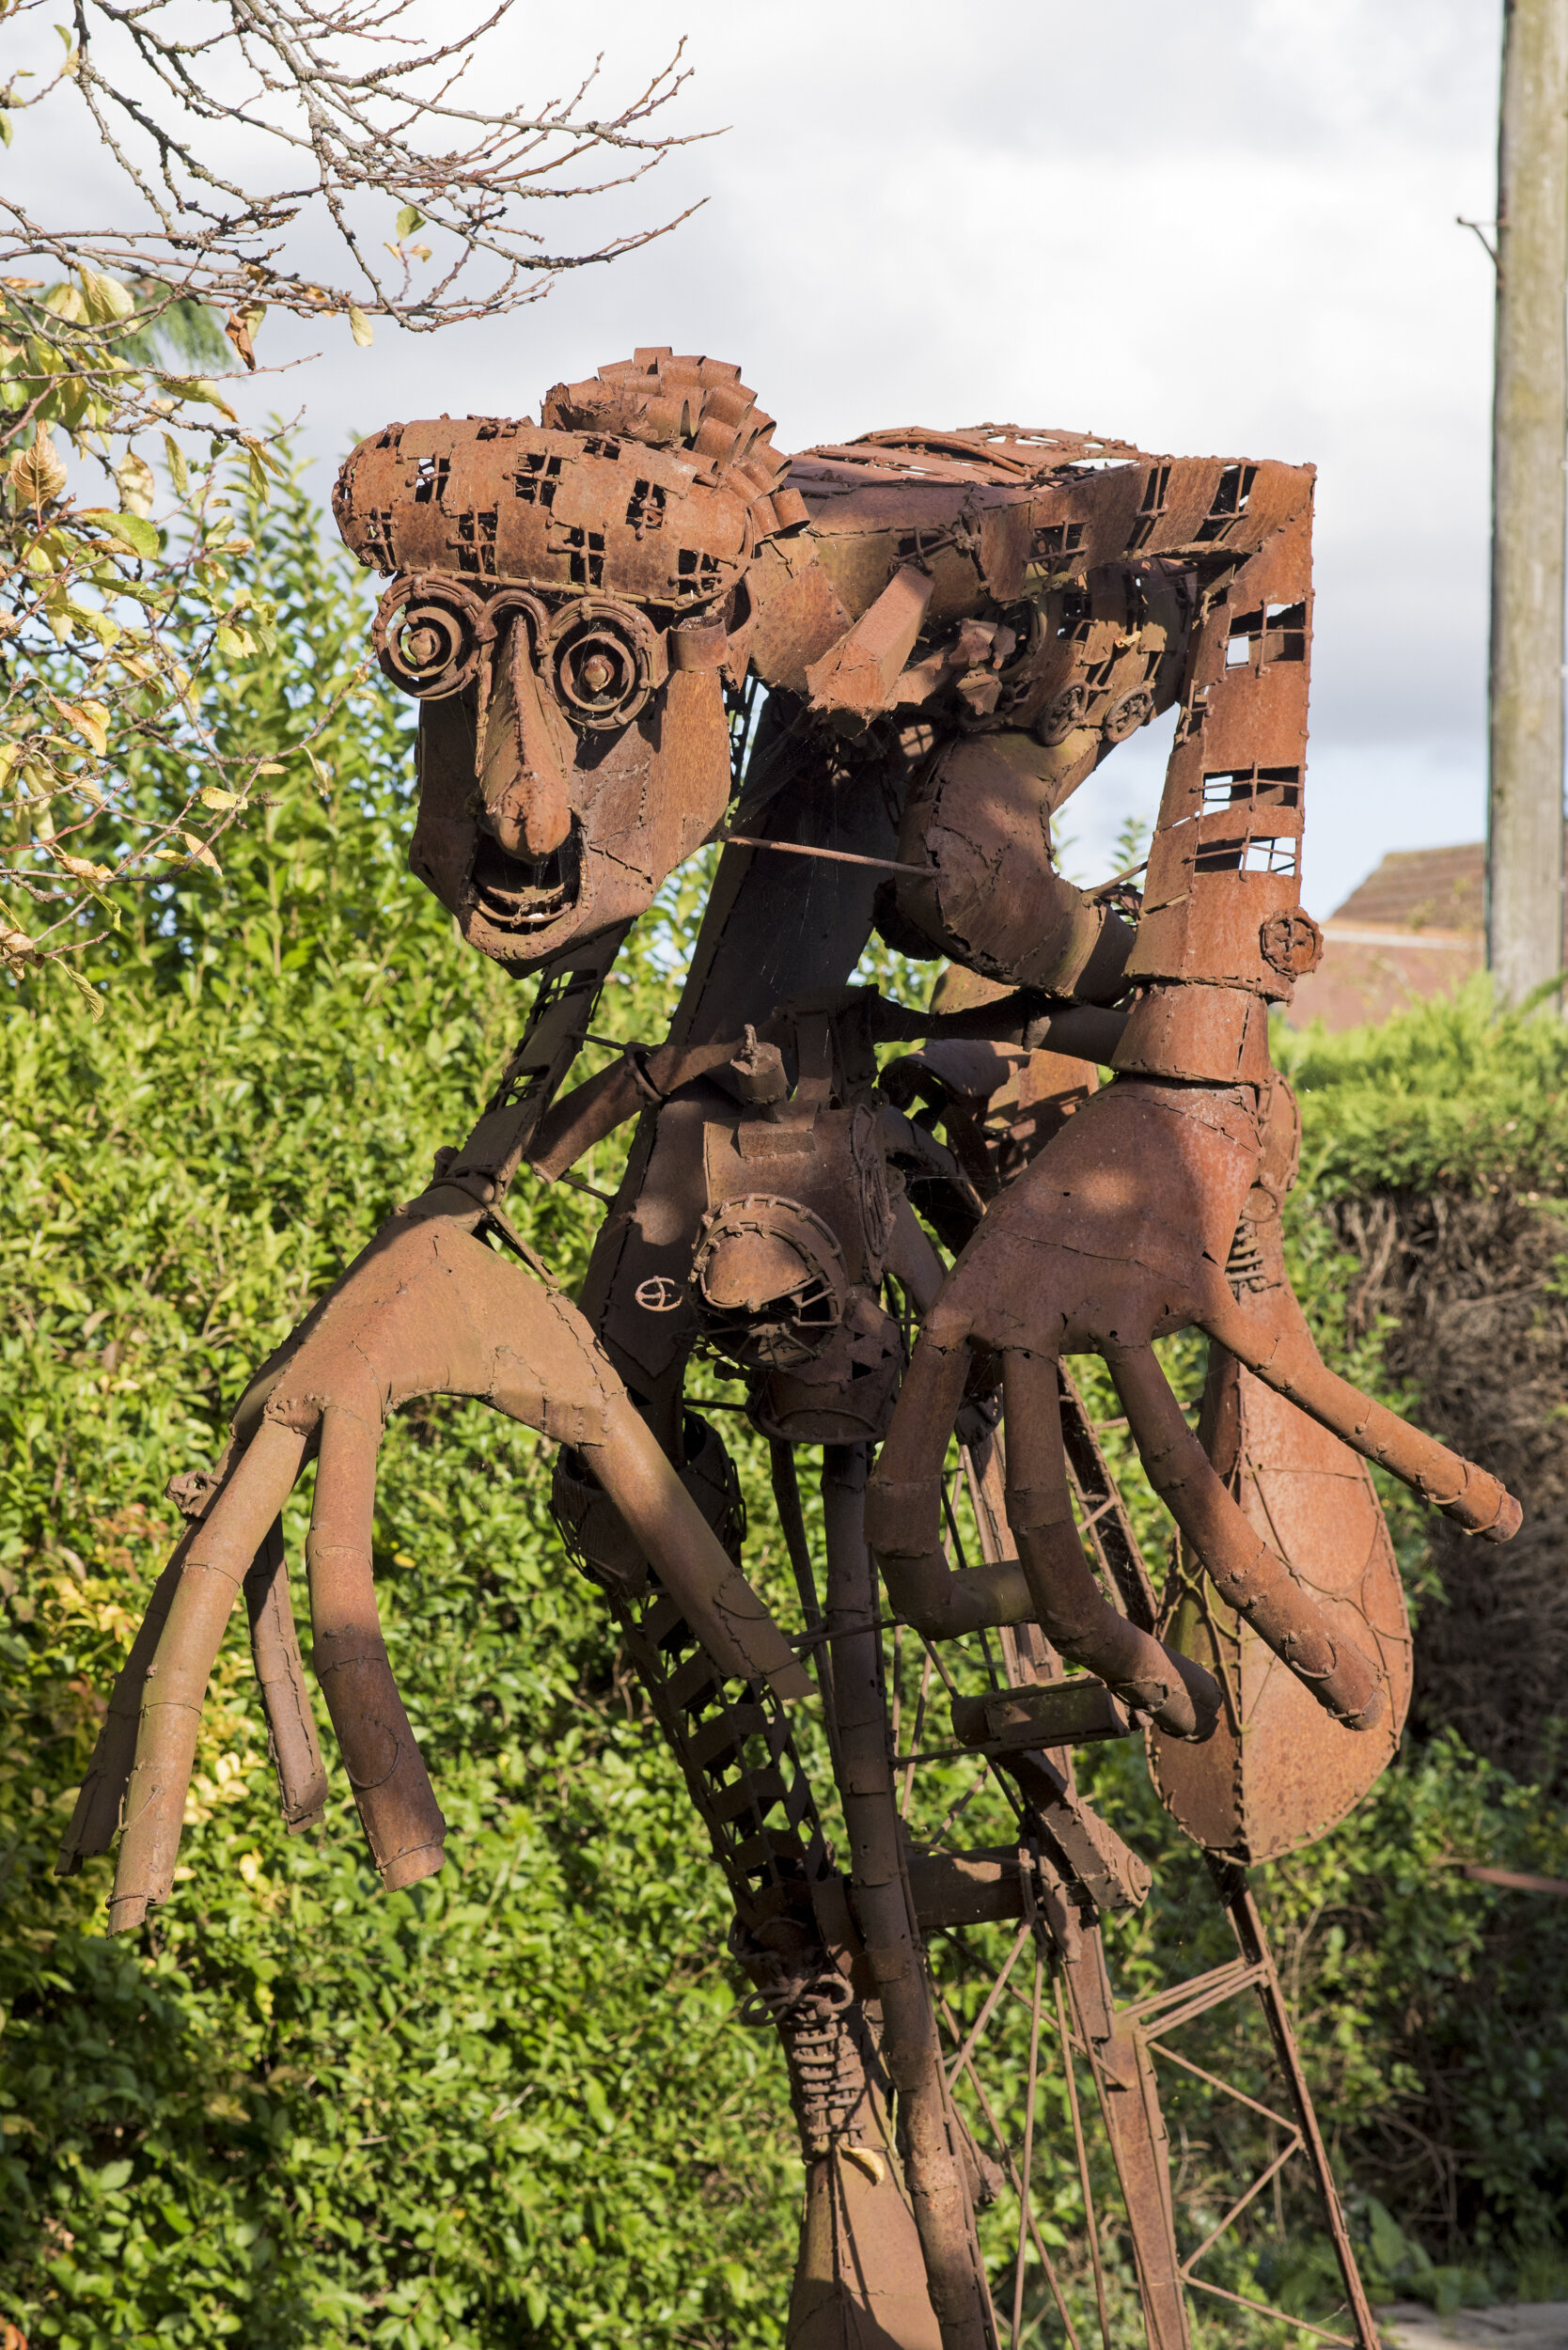 8 Sculpture Garden - Histon - Cambridgeshire - Tony Hillier - The Keepers Project - David Clegg -Thierry Bal.jpg